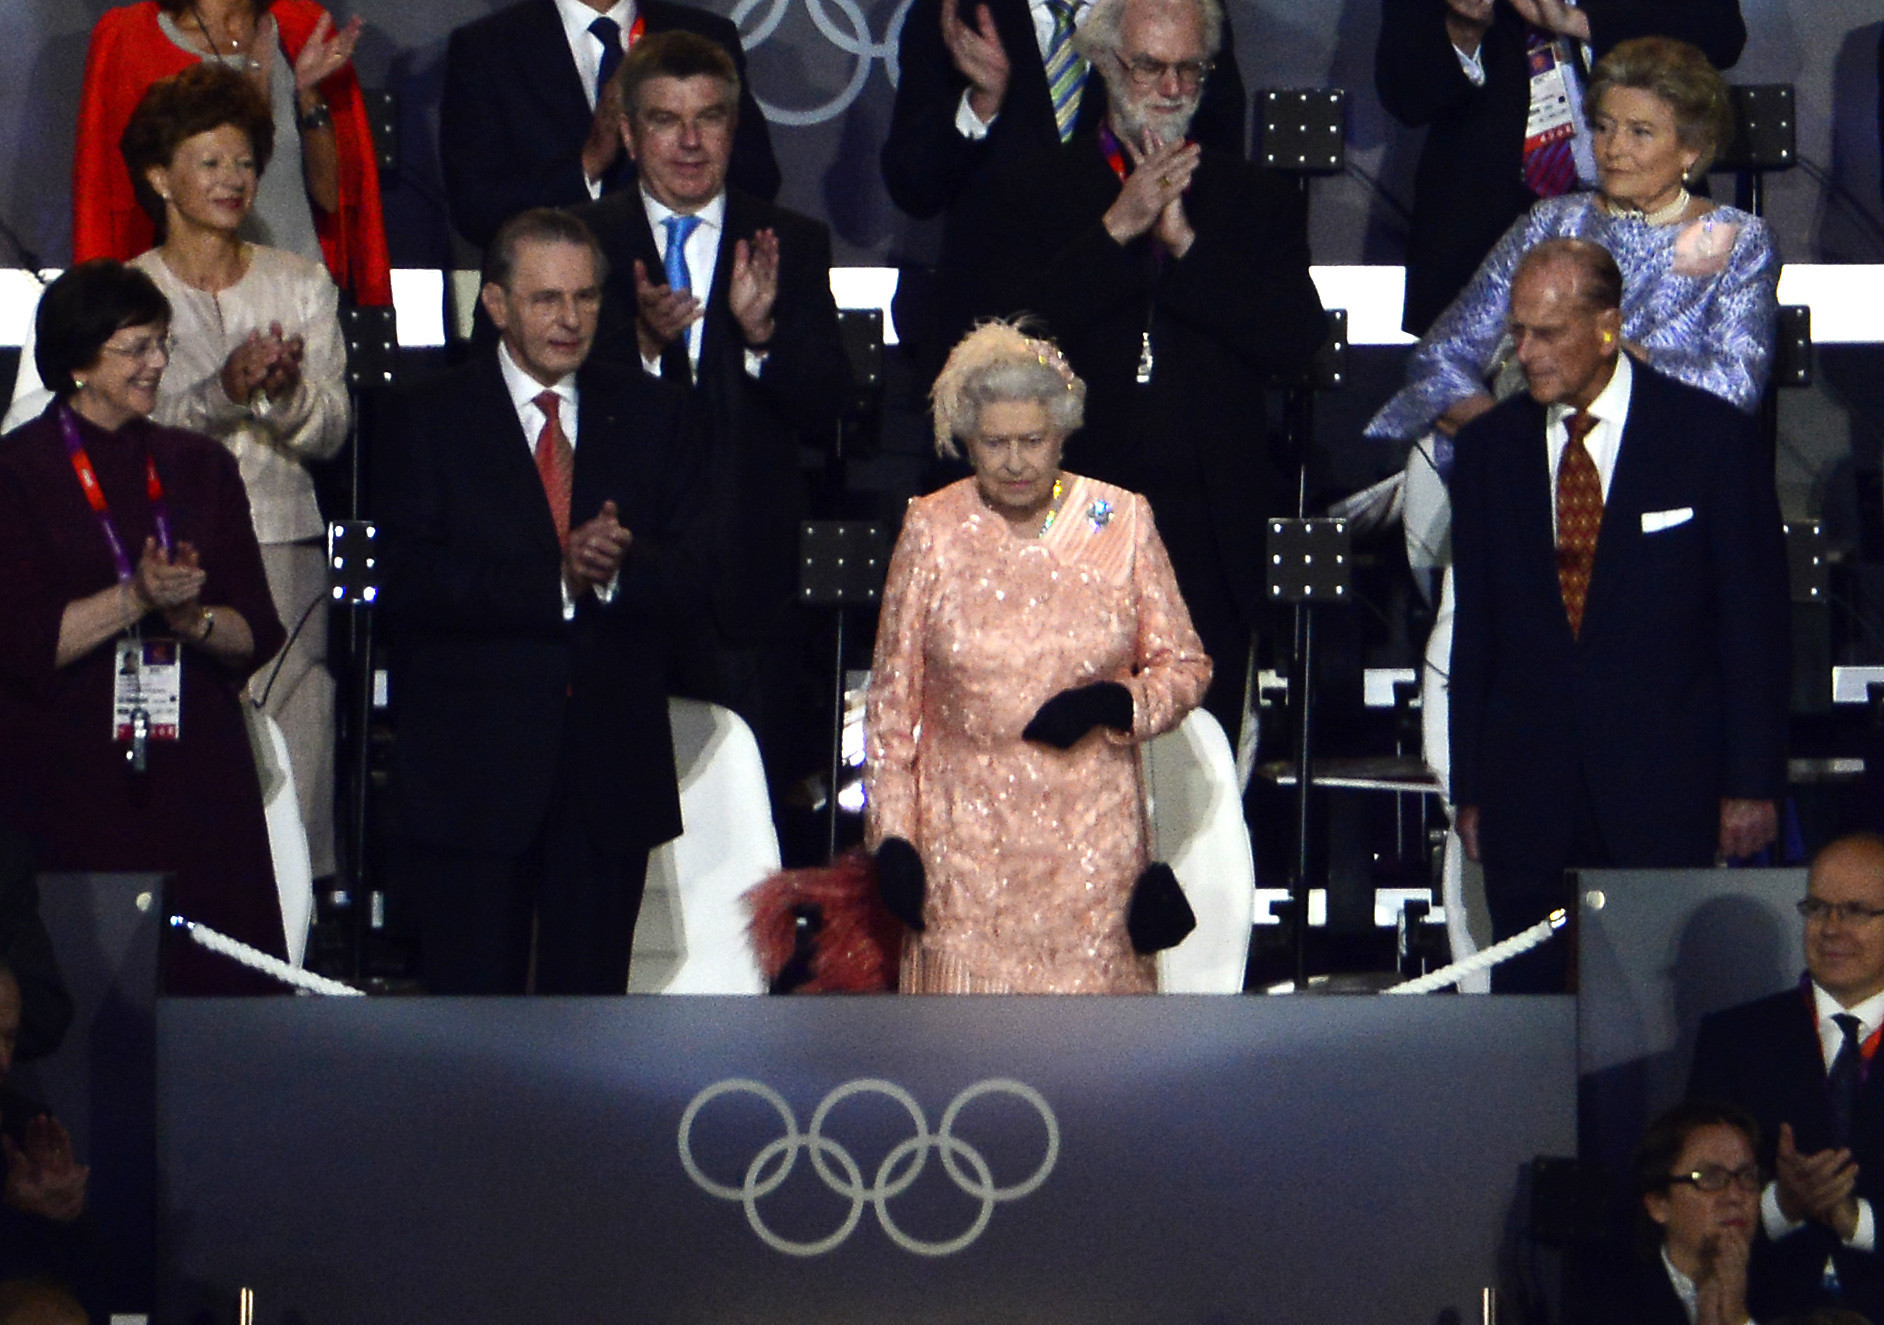 The Queen's arrival in the Royal Box at London 2012 ©Getty Images